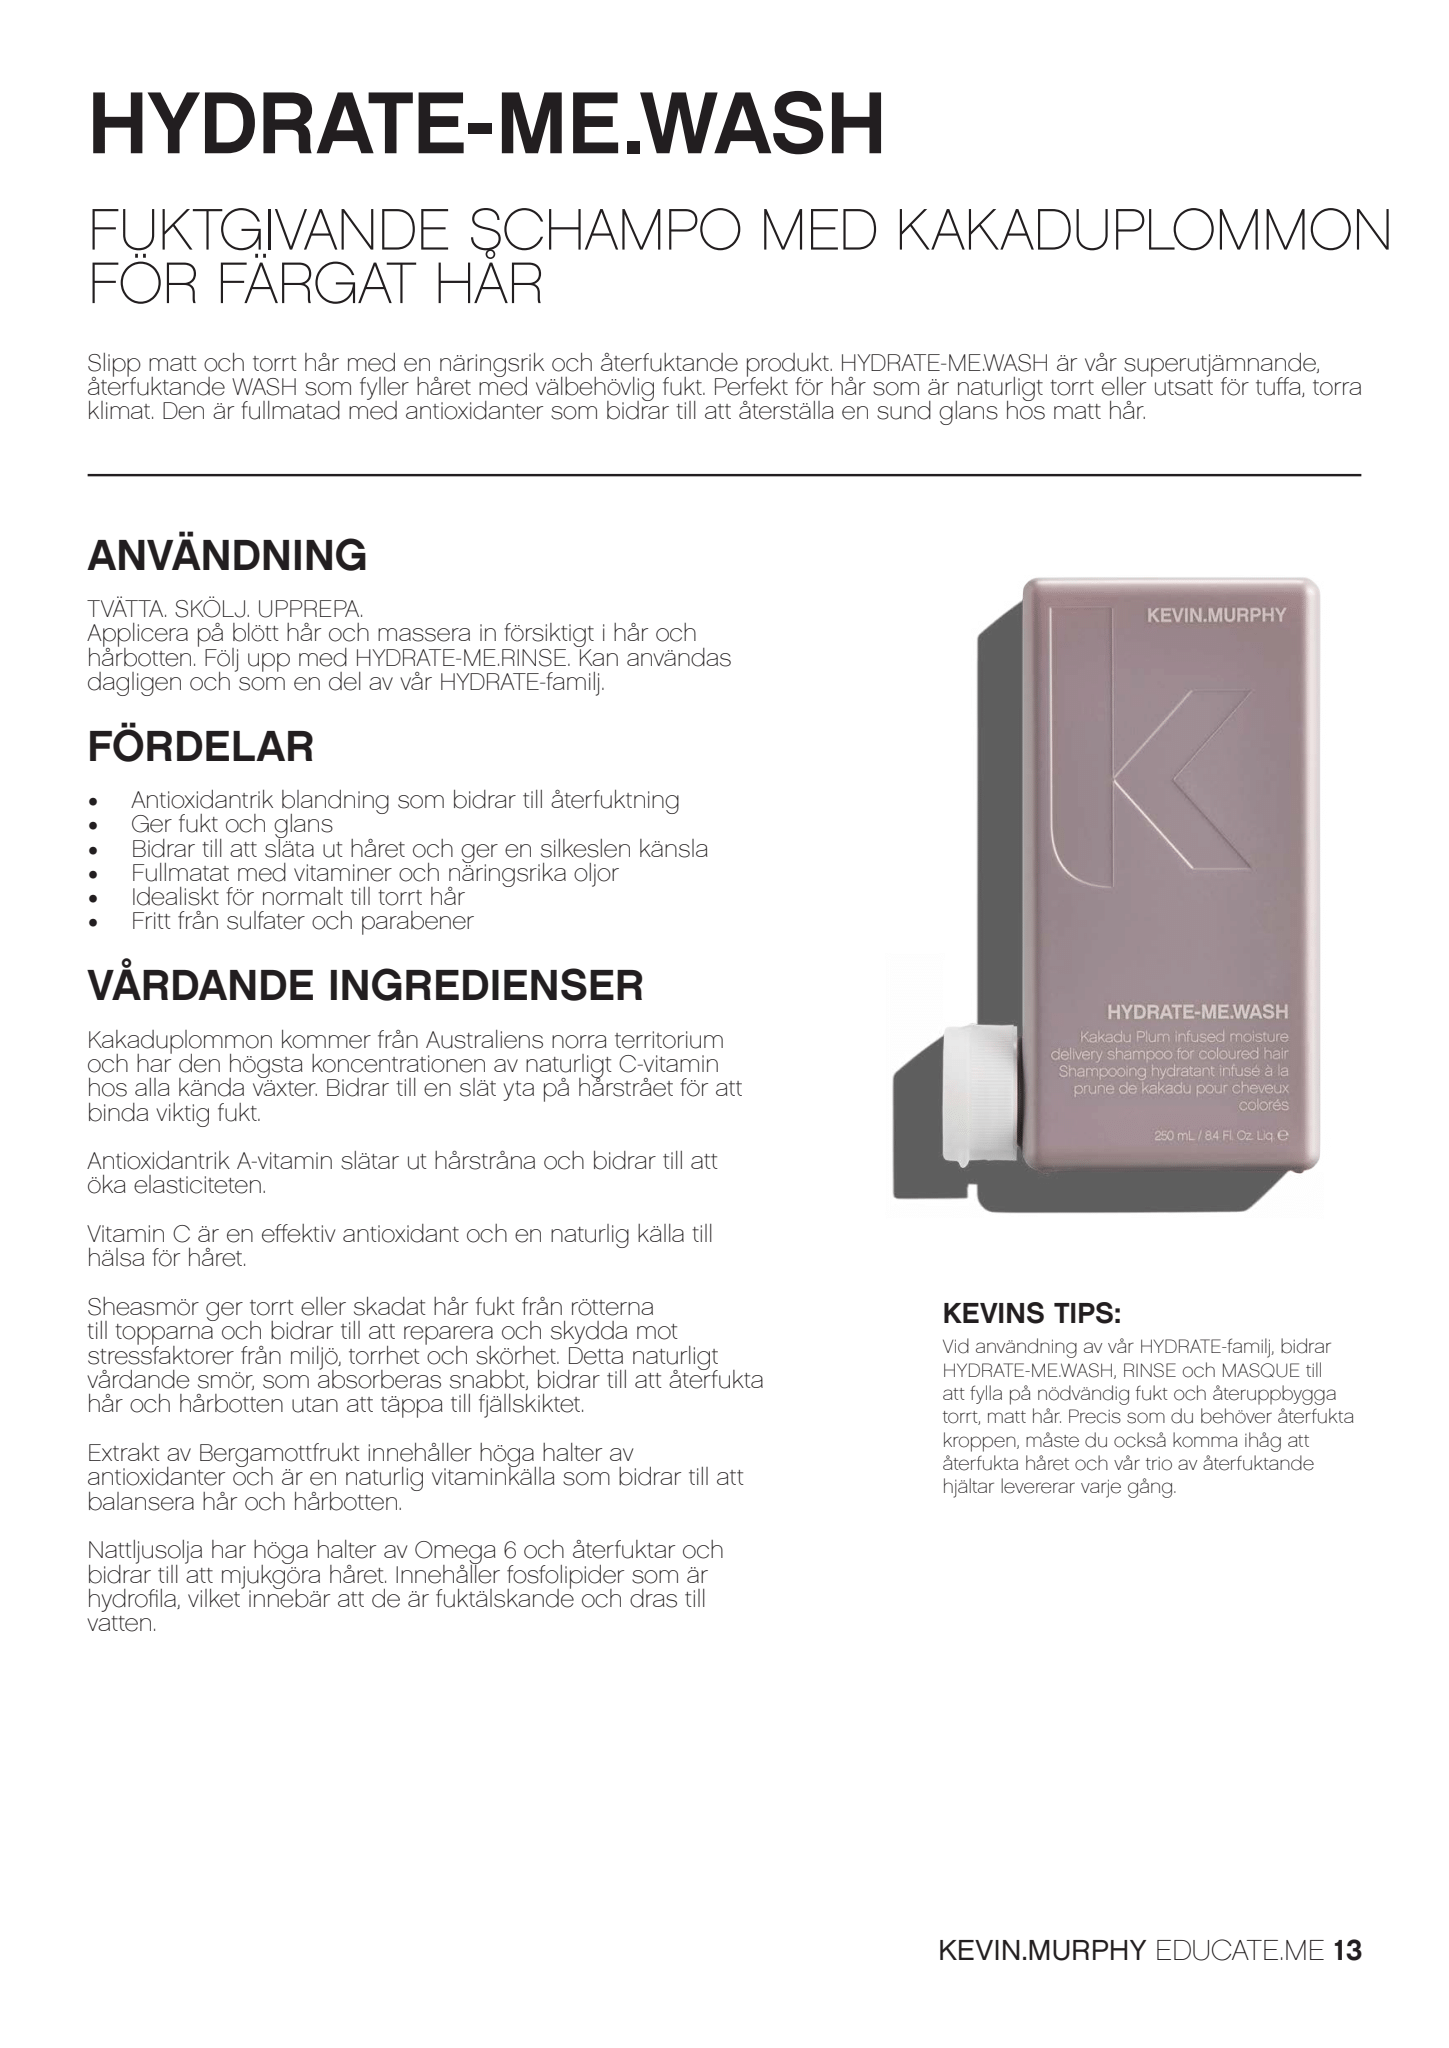 HYDRATE-ME.WASH, Kevin Murphy